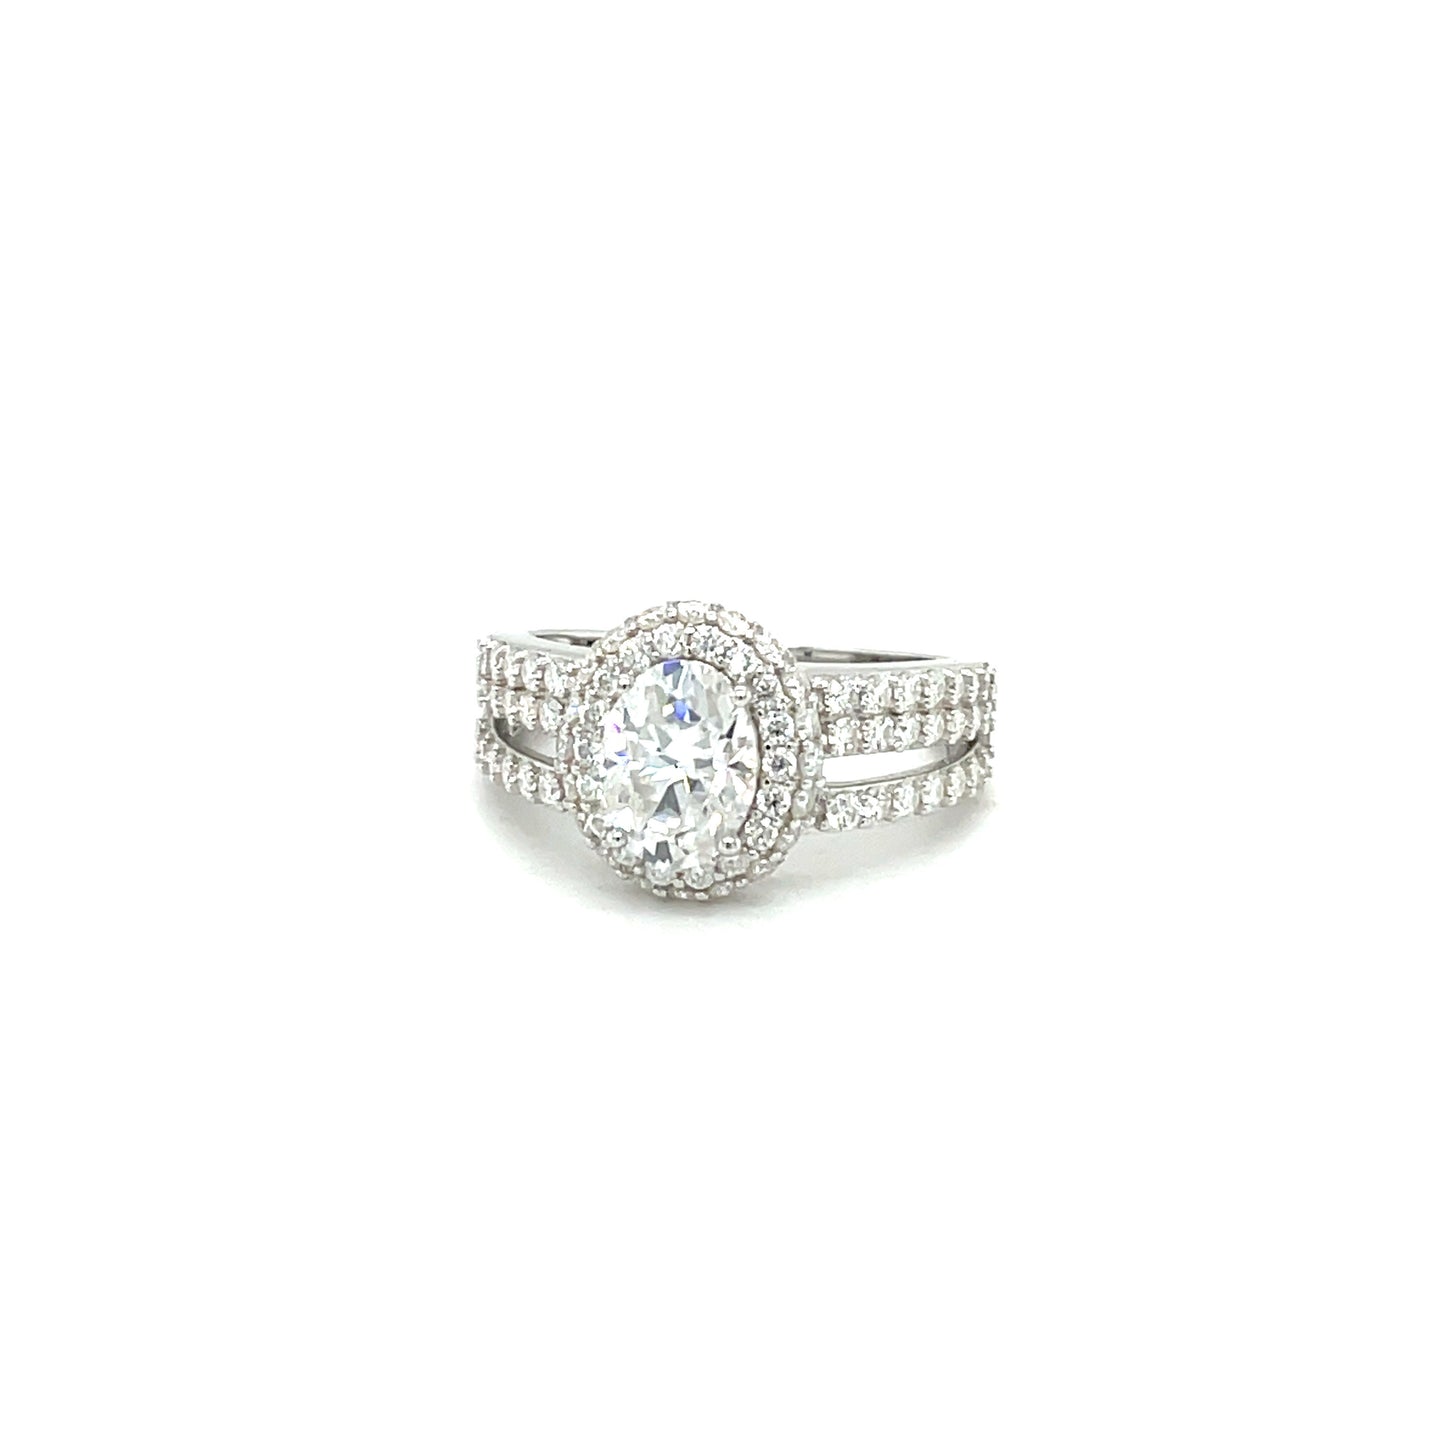 TTT 2 Ct Oval w/ Moissanite Gemstone Highlighted Ring; Rhodium Plated SS.